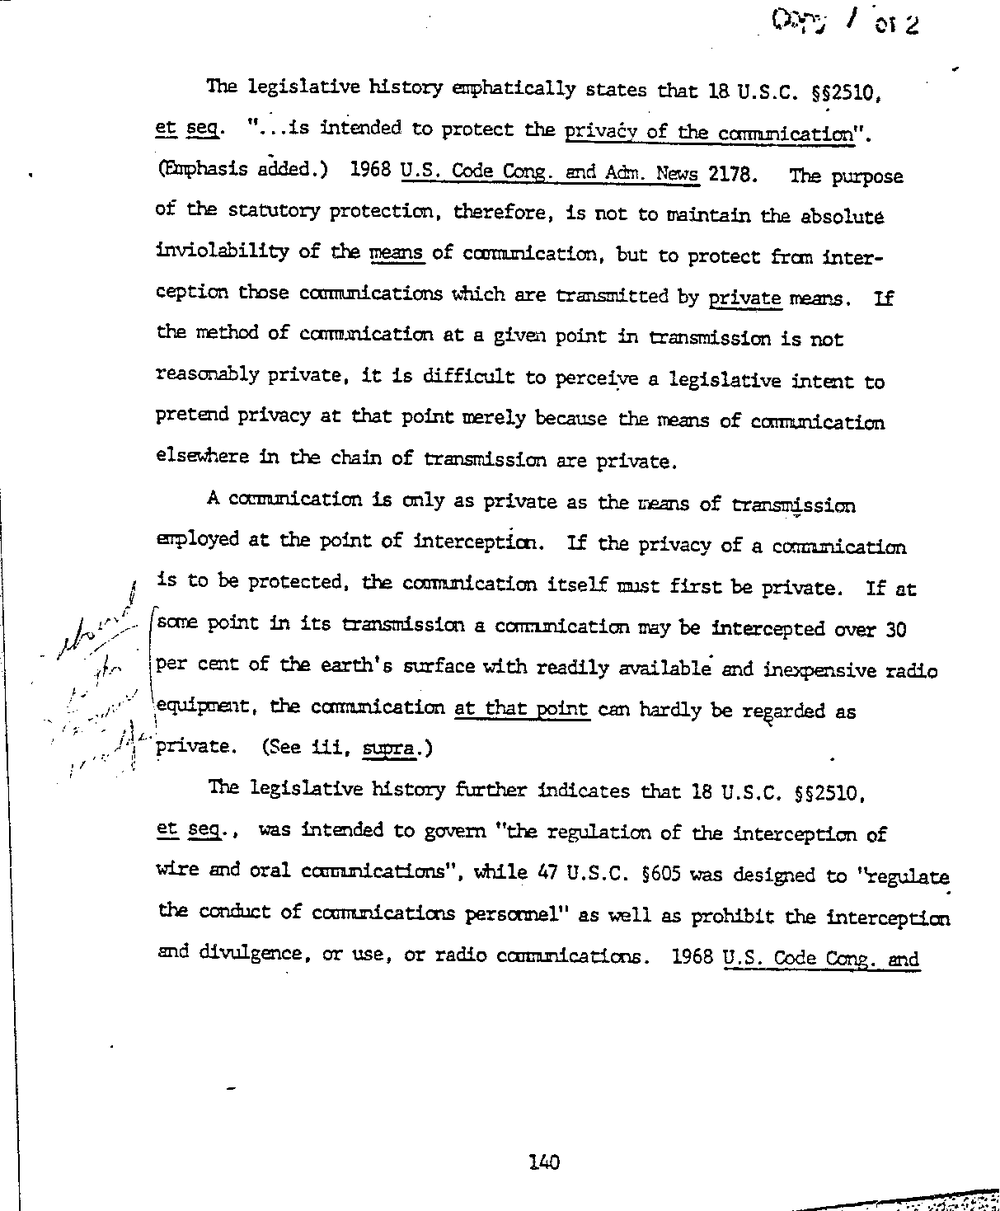 Page 148 from Report on Inquiry Into CIA Related Electronic Surveillance Activities